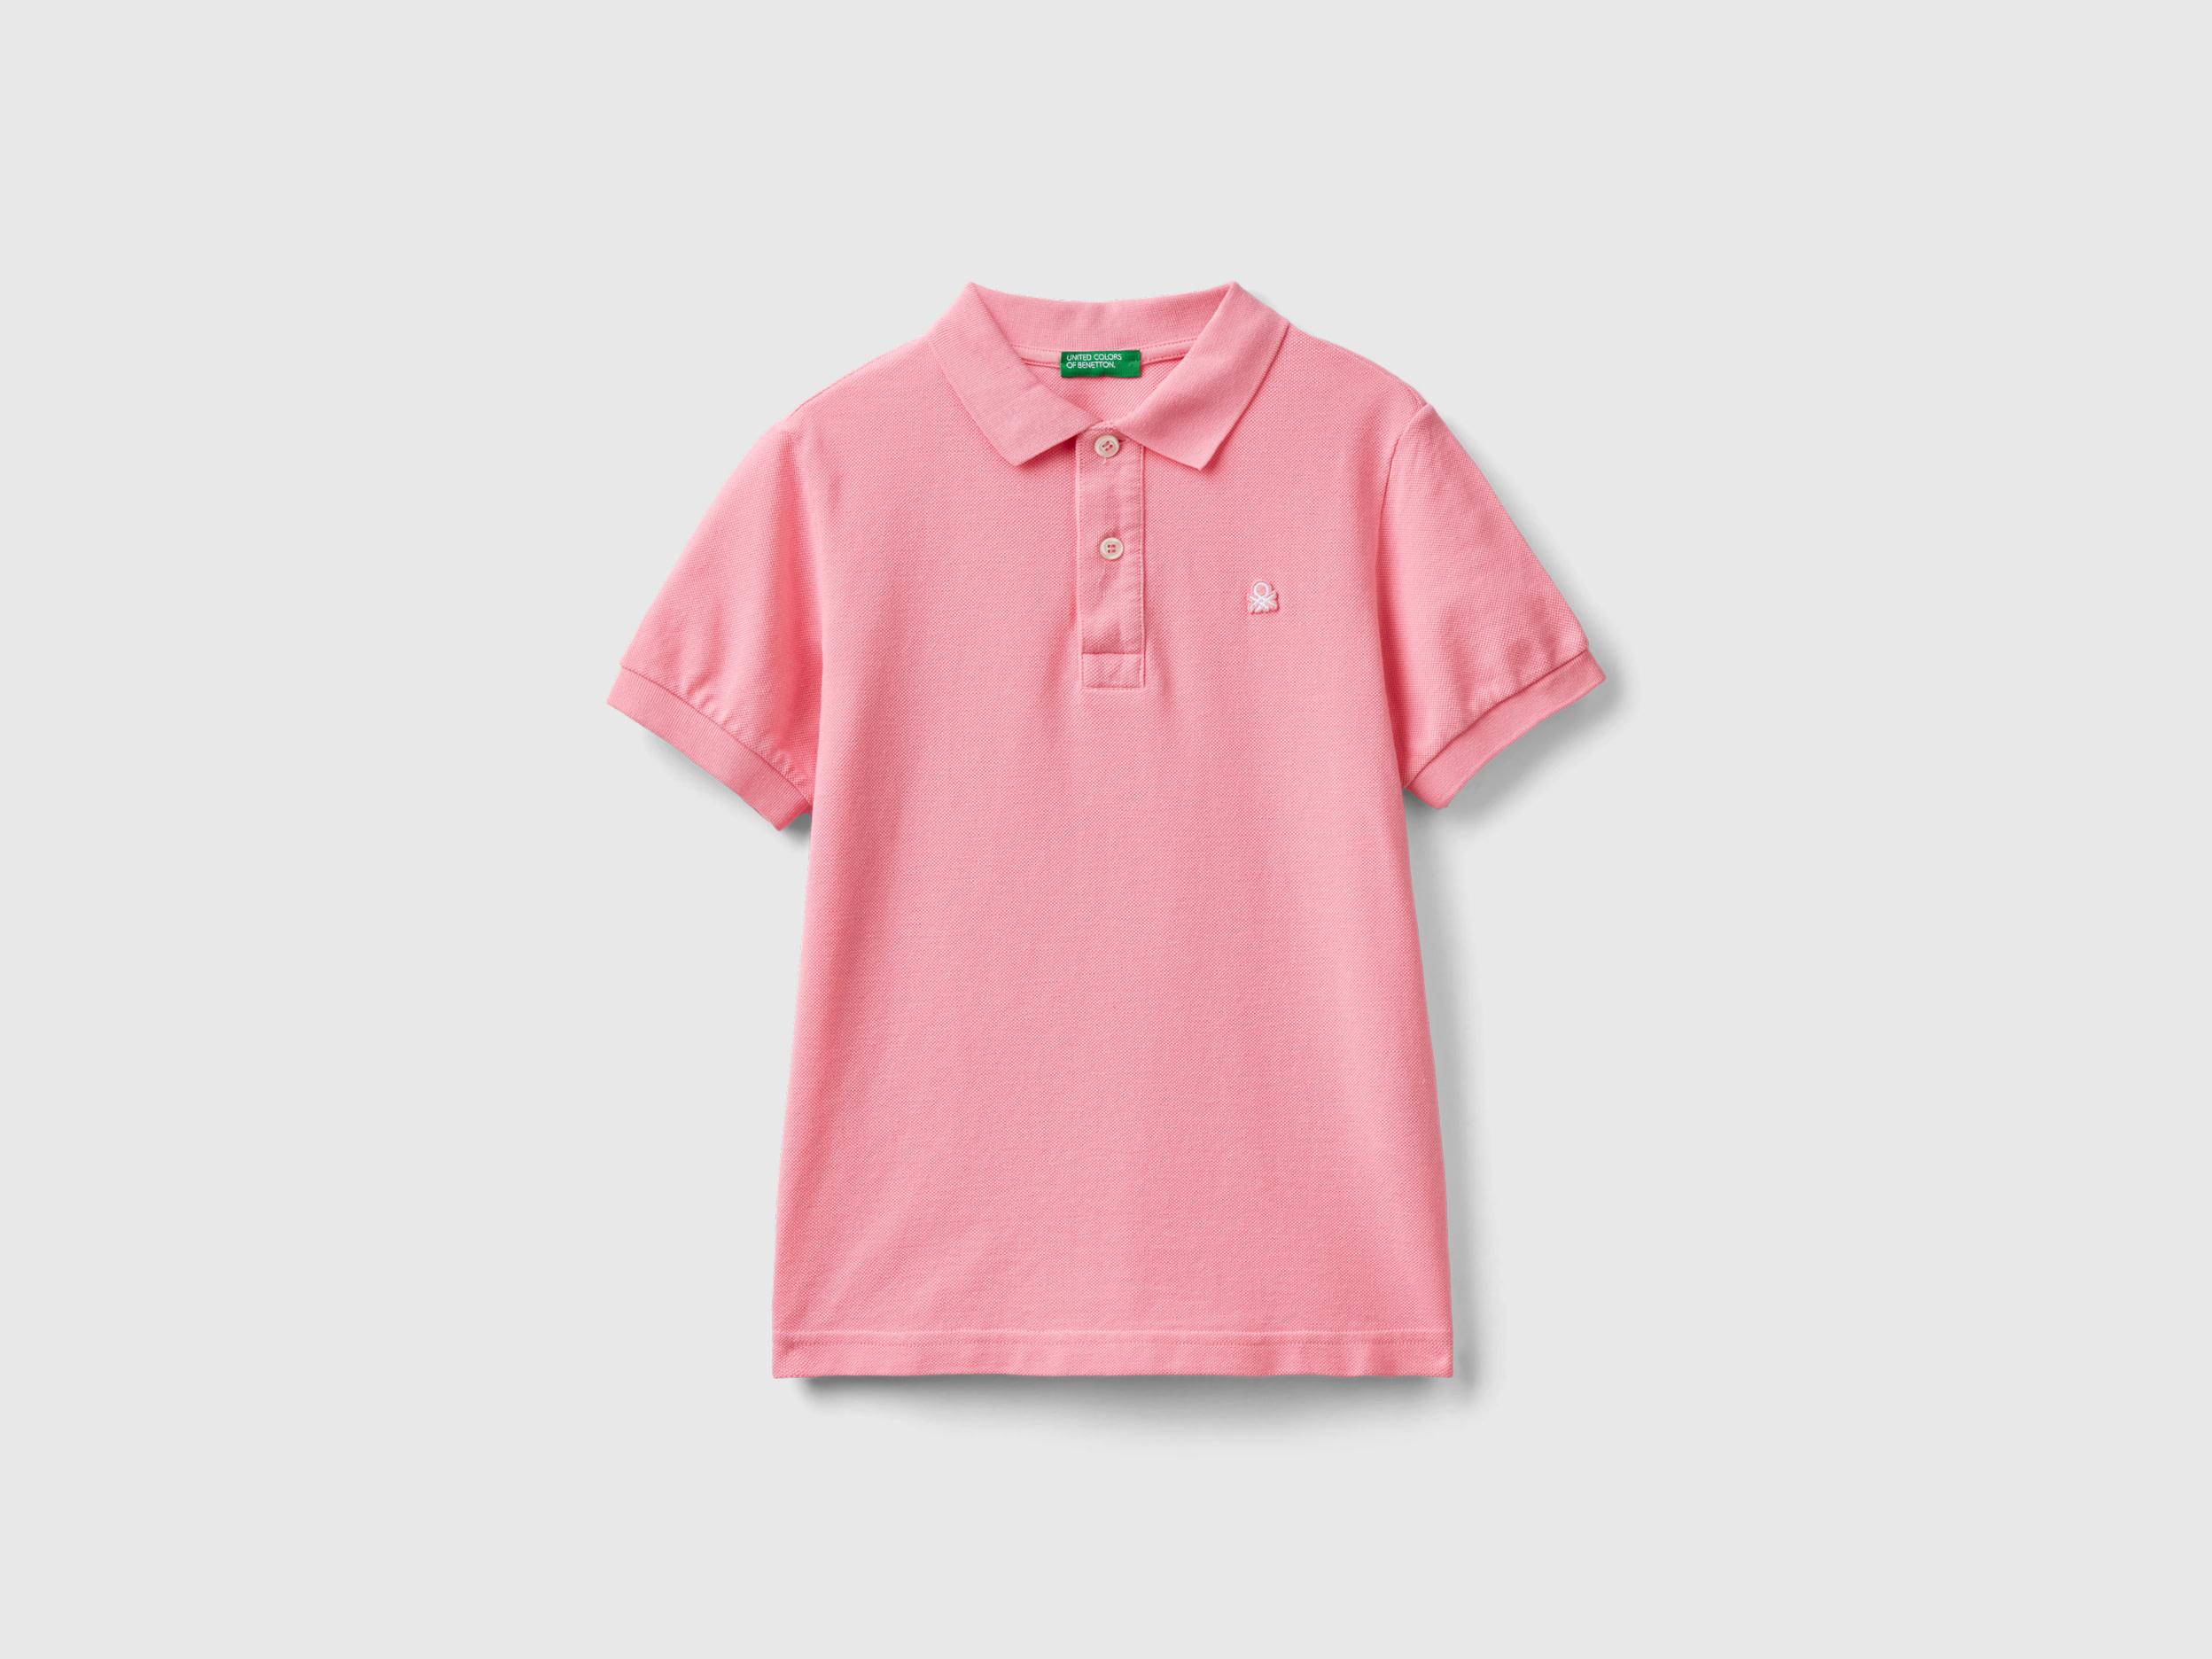 Image of Benetton, Slim Fit Polo In 100% Organic Cotton, size S, Pink, Kids